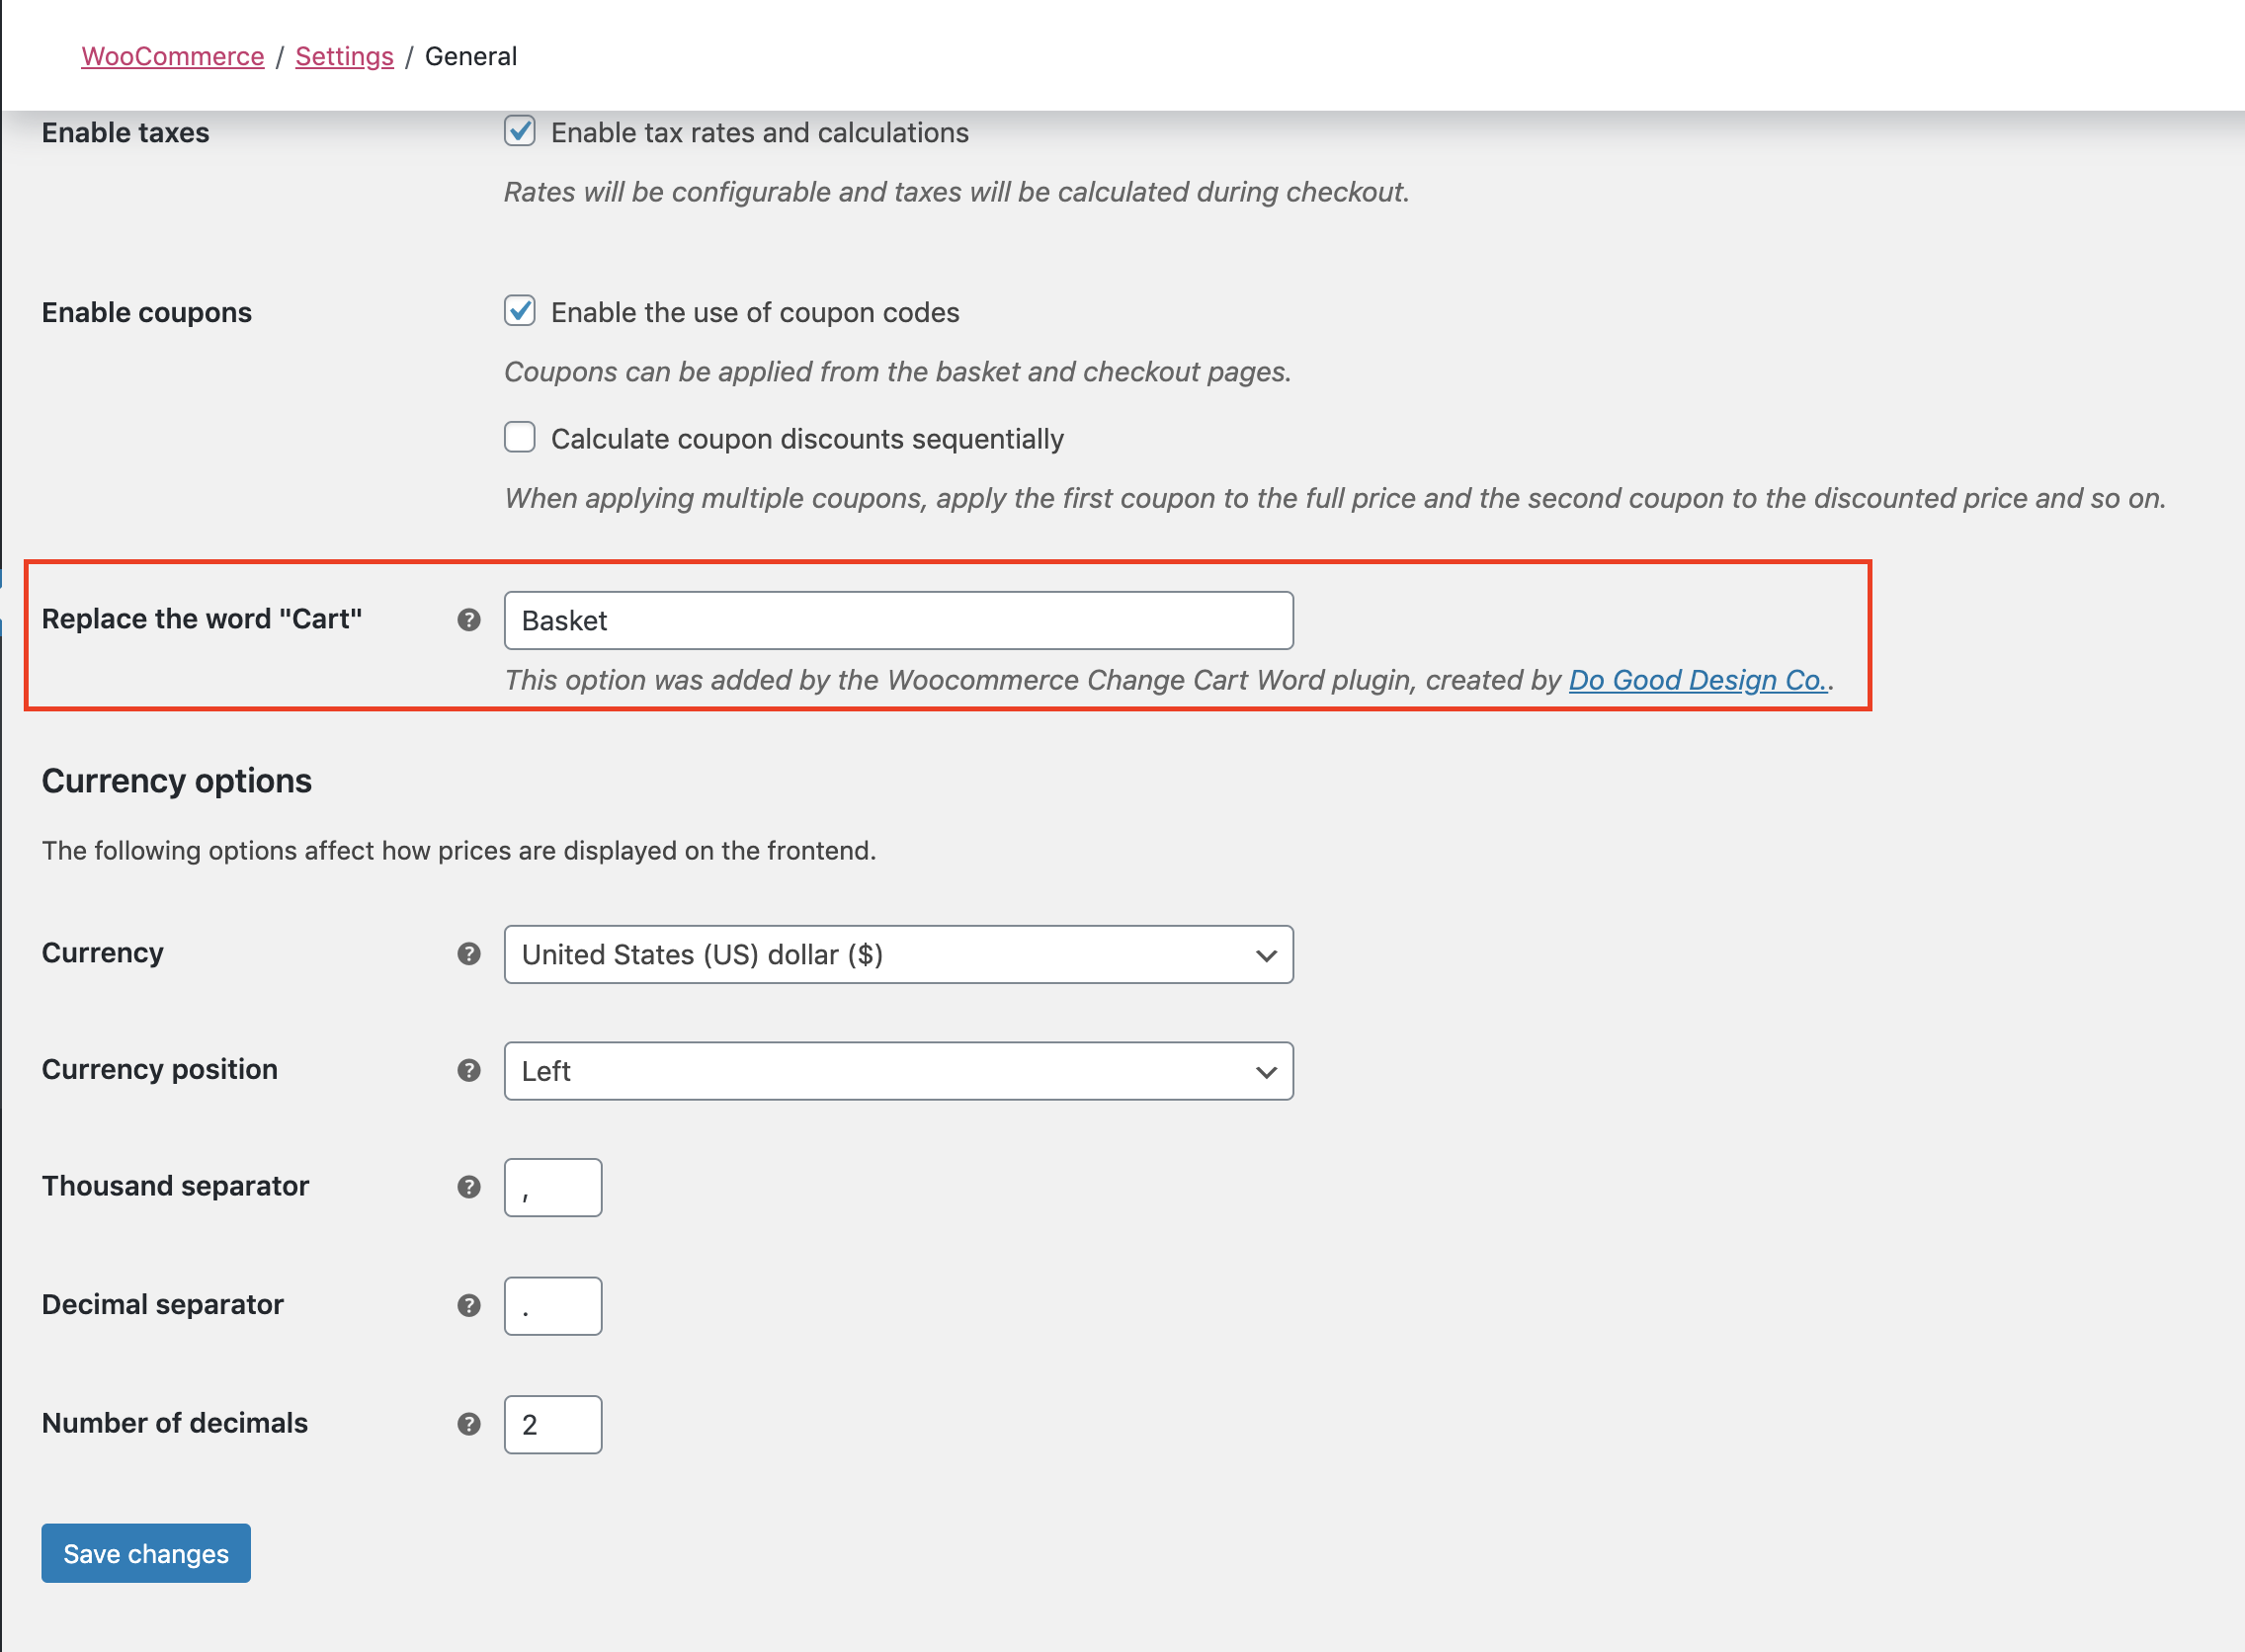 The setting is found under Woocommerce > Settings > General Options